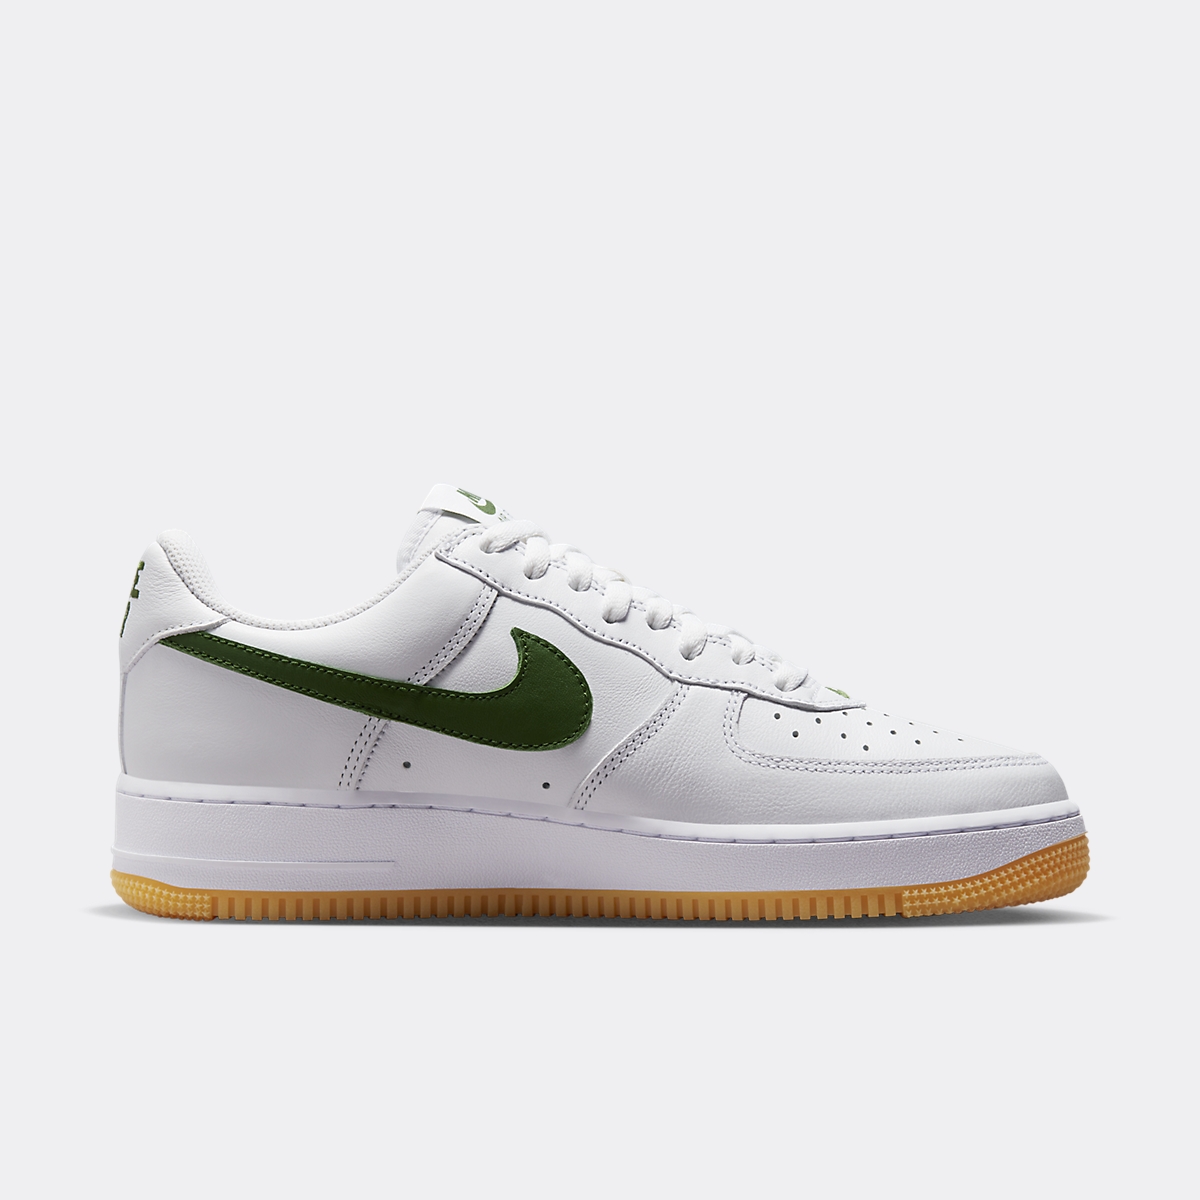 Nike Air Force 1 Low Color Of The Month Forest Green - Sneakers.fr